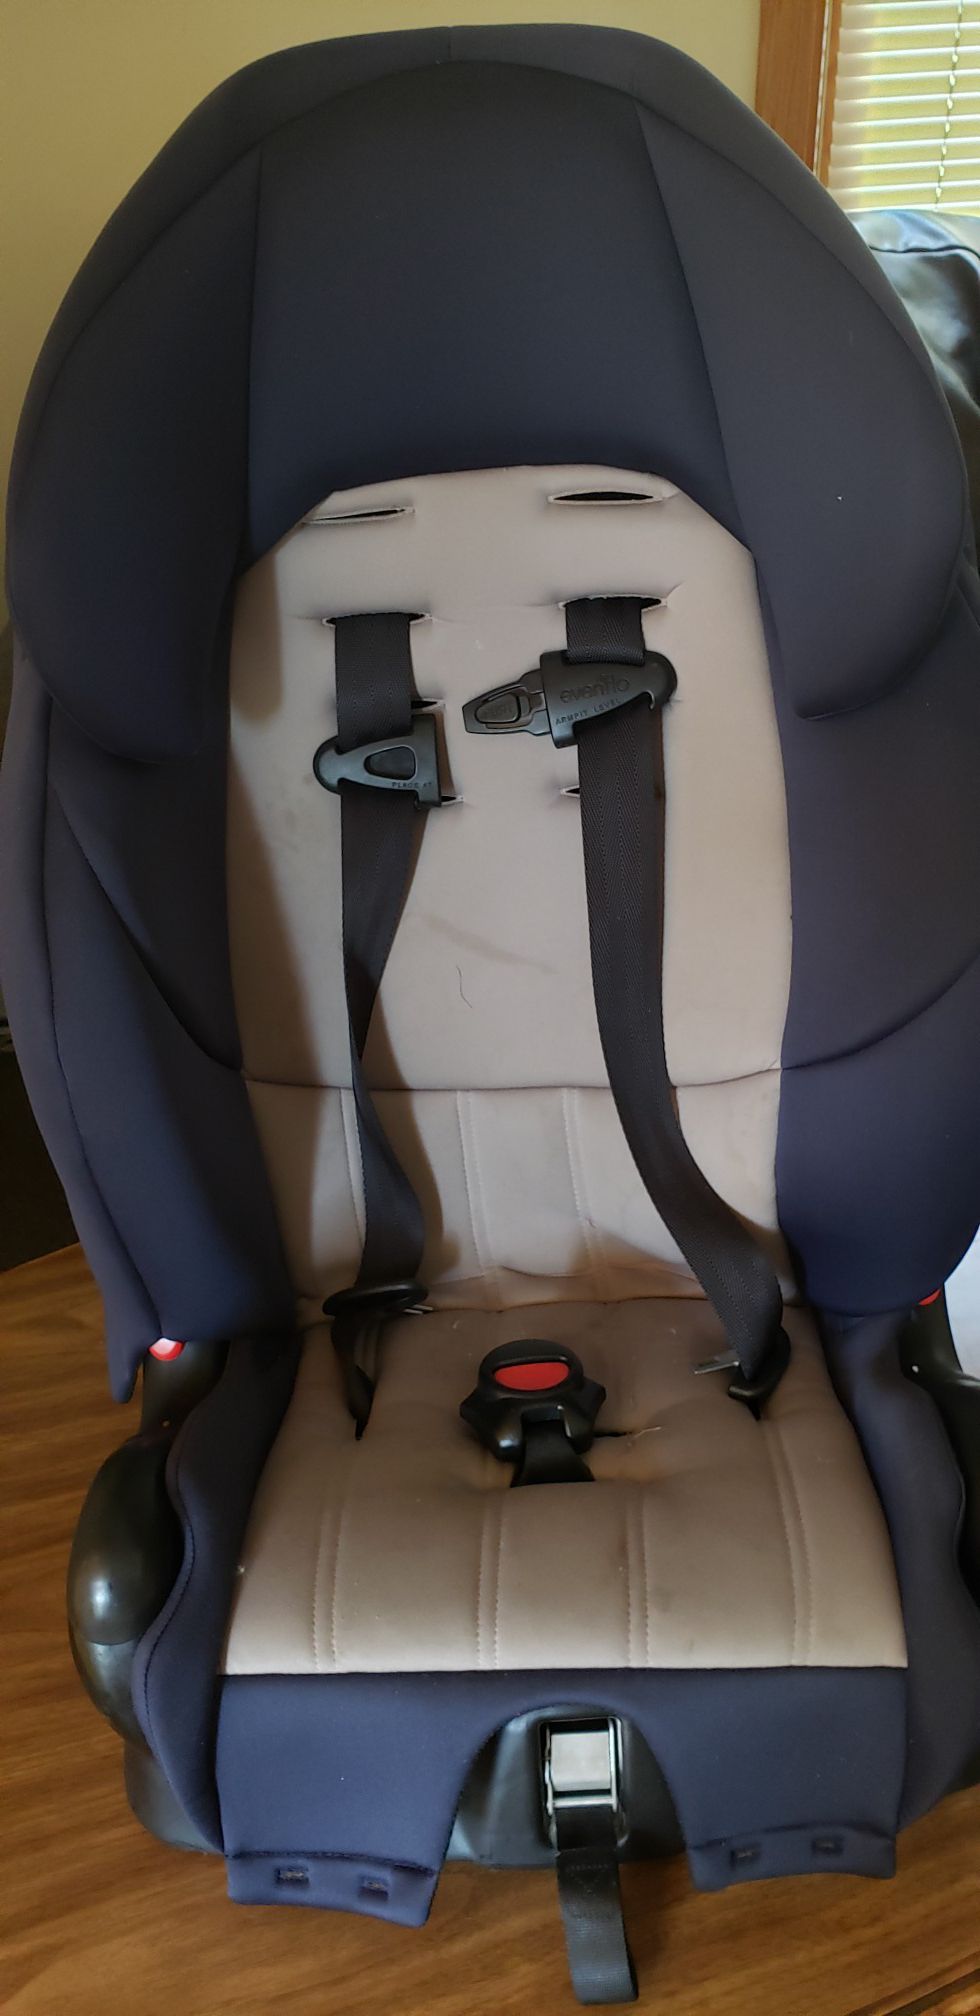 Carseats evenflo 2 in 1